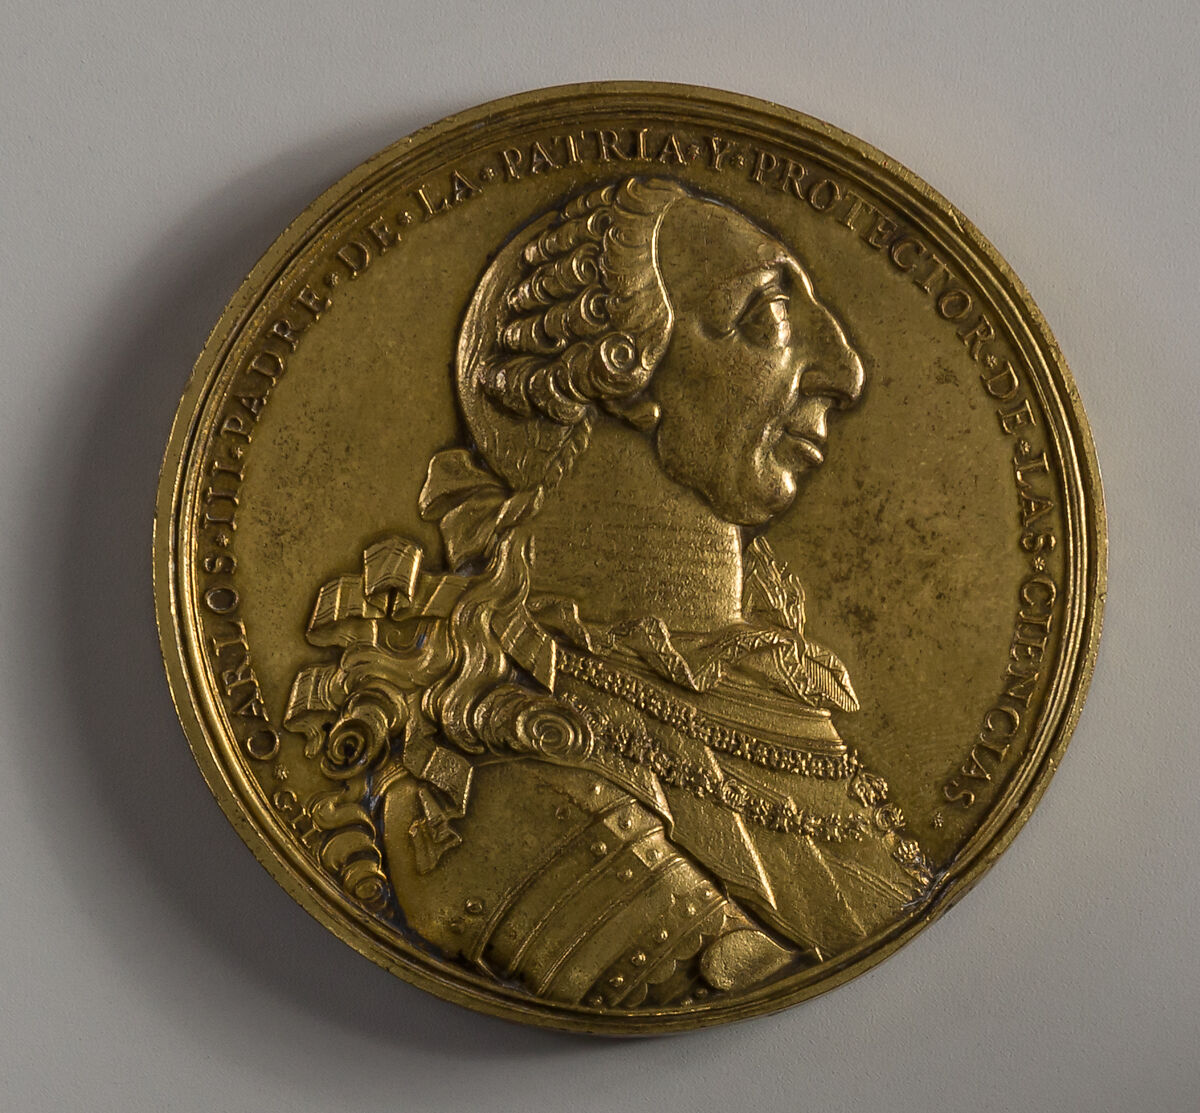 Charles III of Spain, as Protector of the Royal Academy of Mexico, Medalist: Geronimo Antonio Gil (1732–1798), Silver gilt, Mexican 